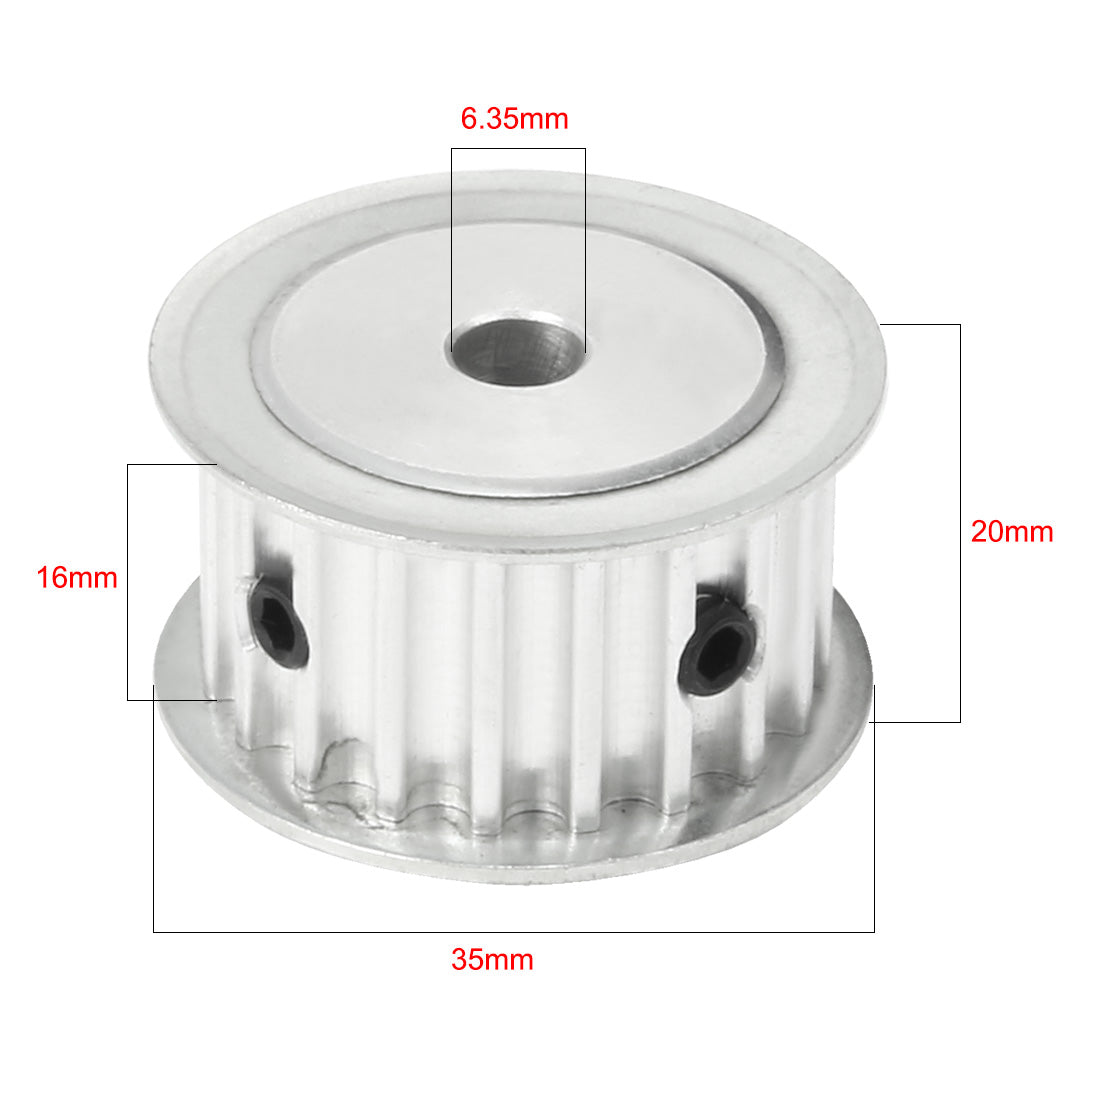 uxcell Uxcell Aluminum 5M 20 Teeth 6.35mm Bore Timing Belt Idler Pulley Flange Synchronous Wheel for 15mm Belt 3D Printer CNC